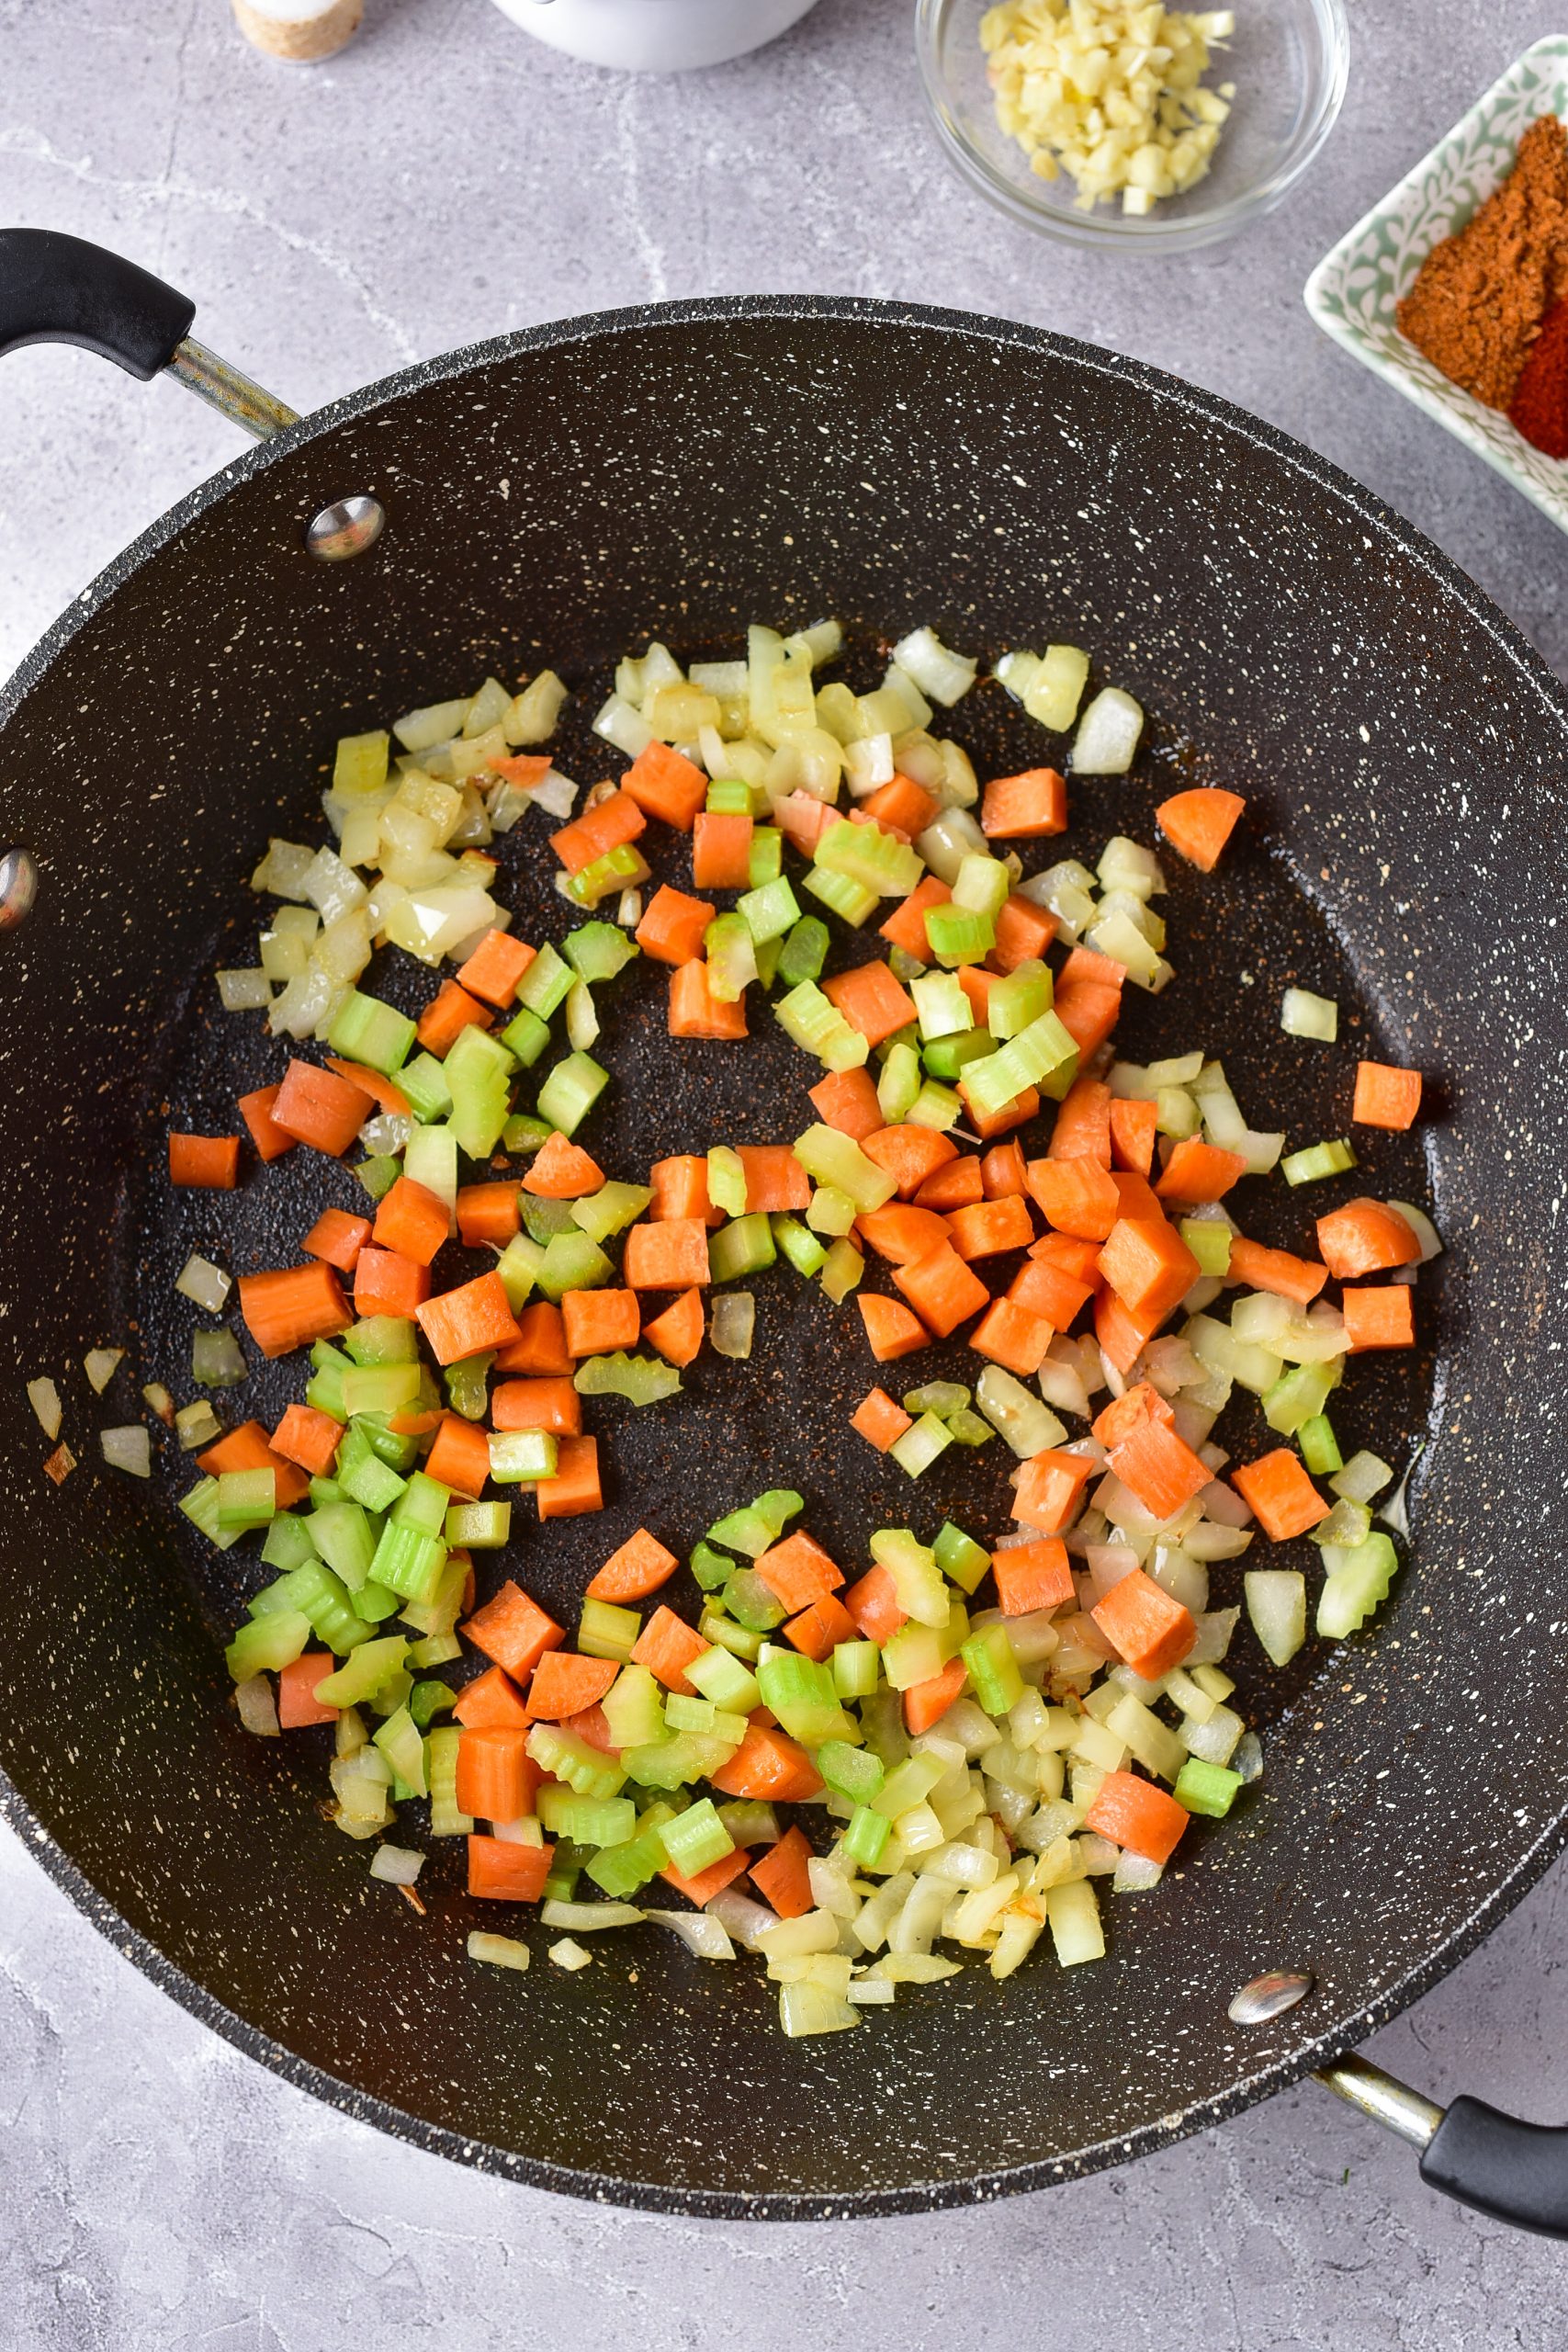 Stir in the onions, carrots, and celery, and saute for about 5 minutes until beginning to soften. 